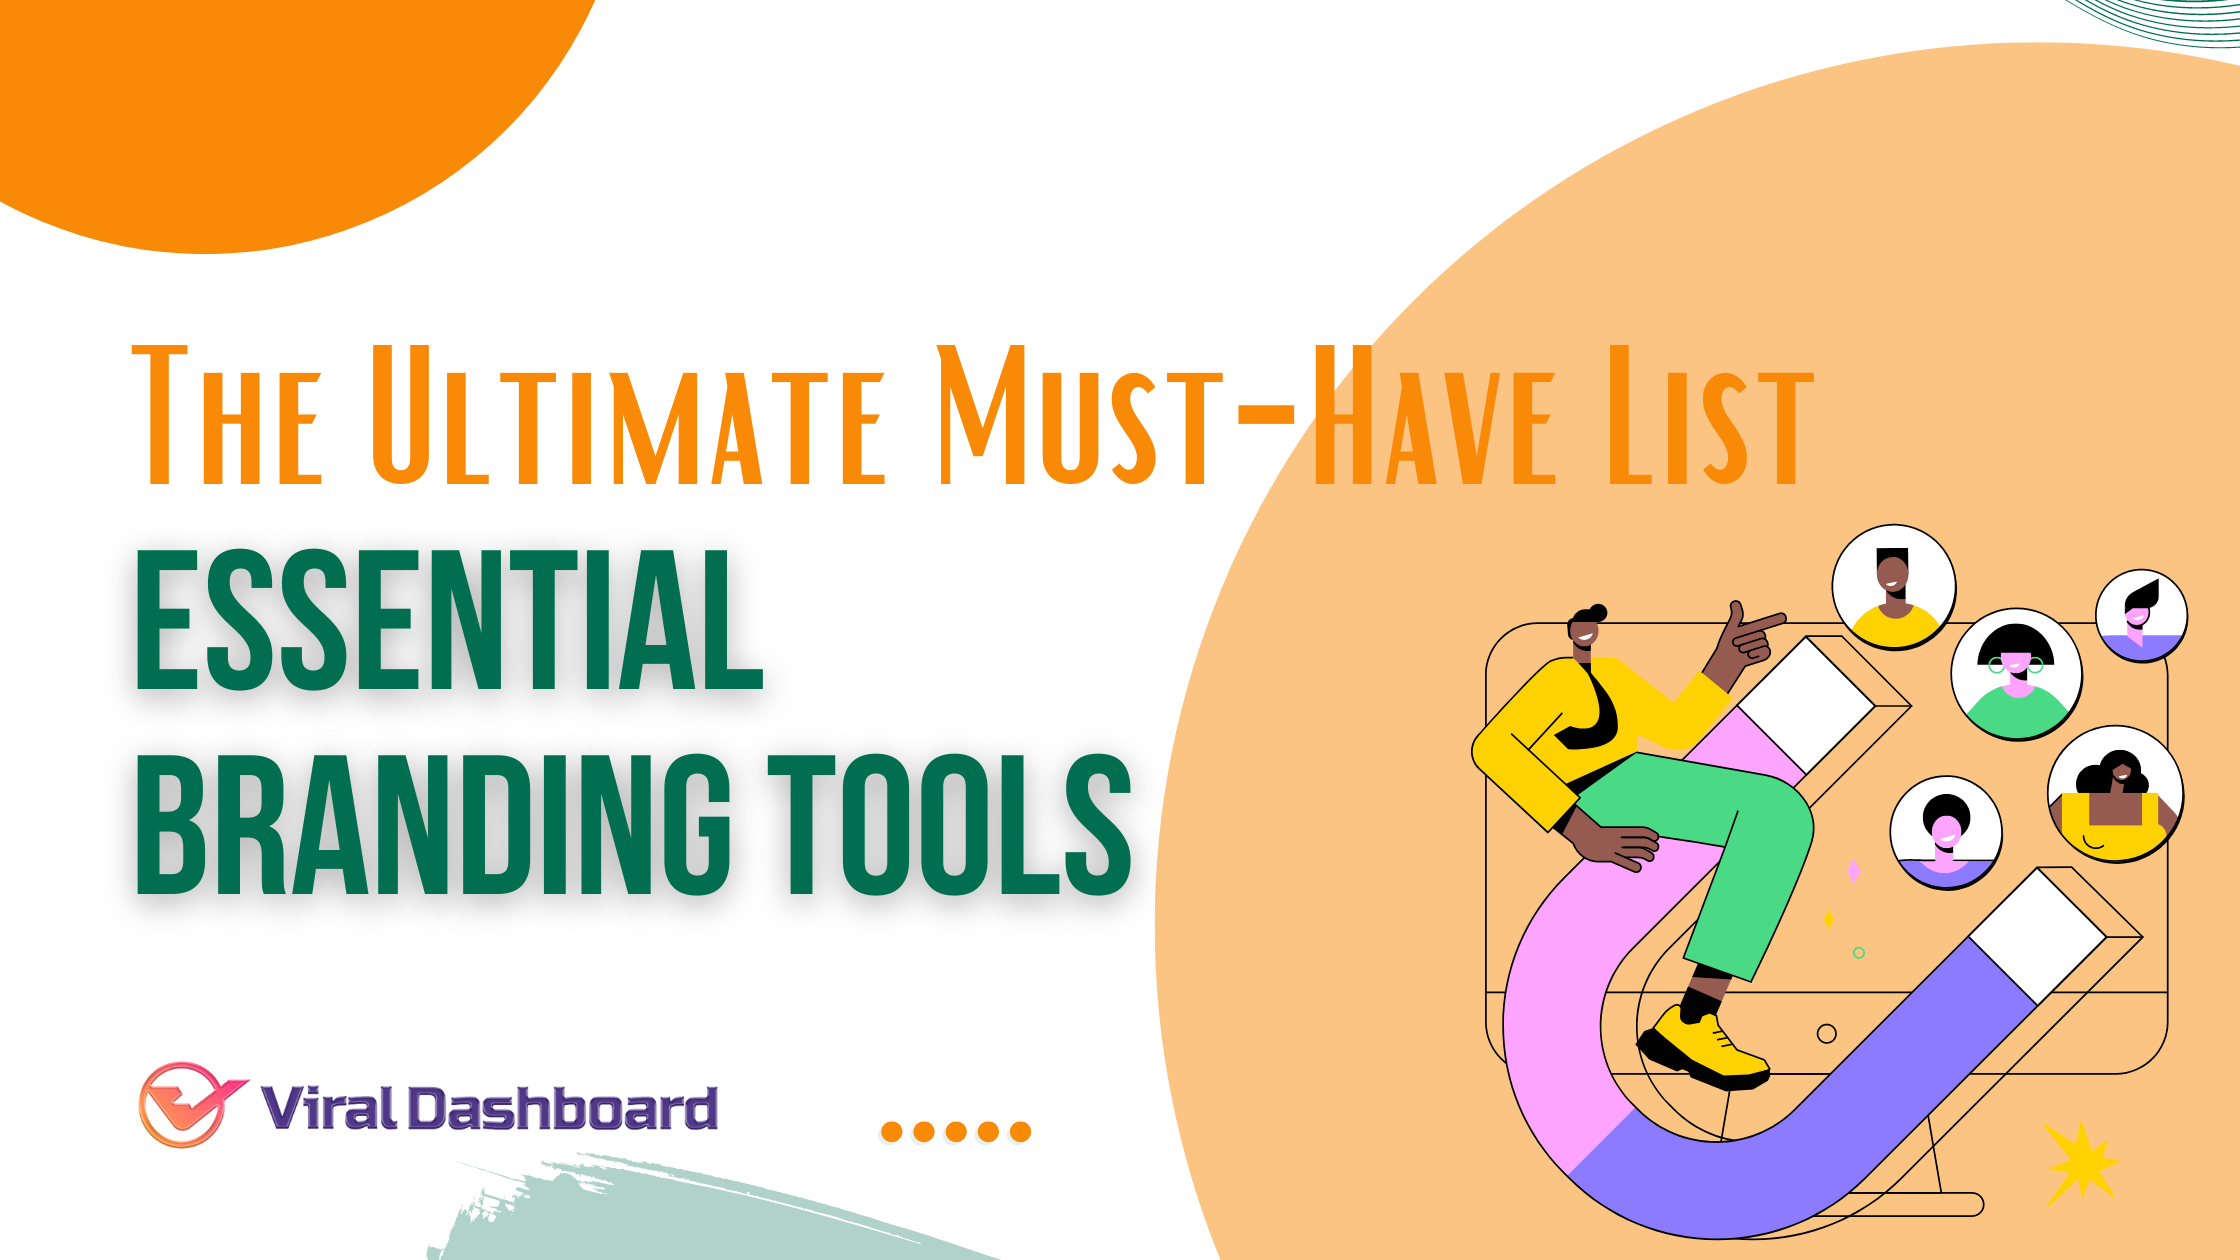 Essential Branding Tools: The Ultimate Must-Have List